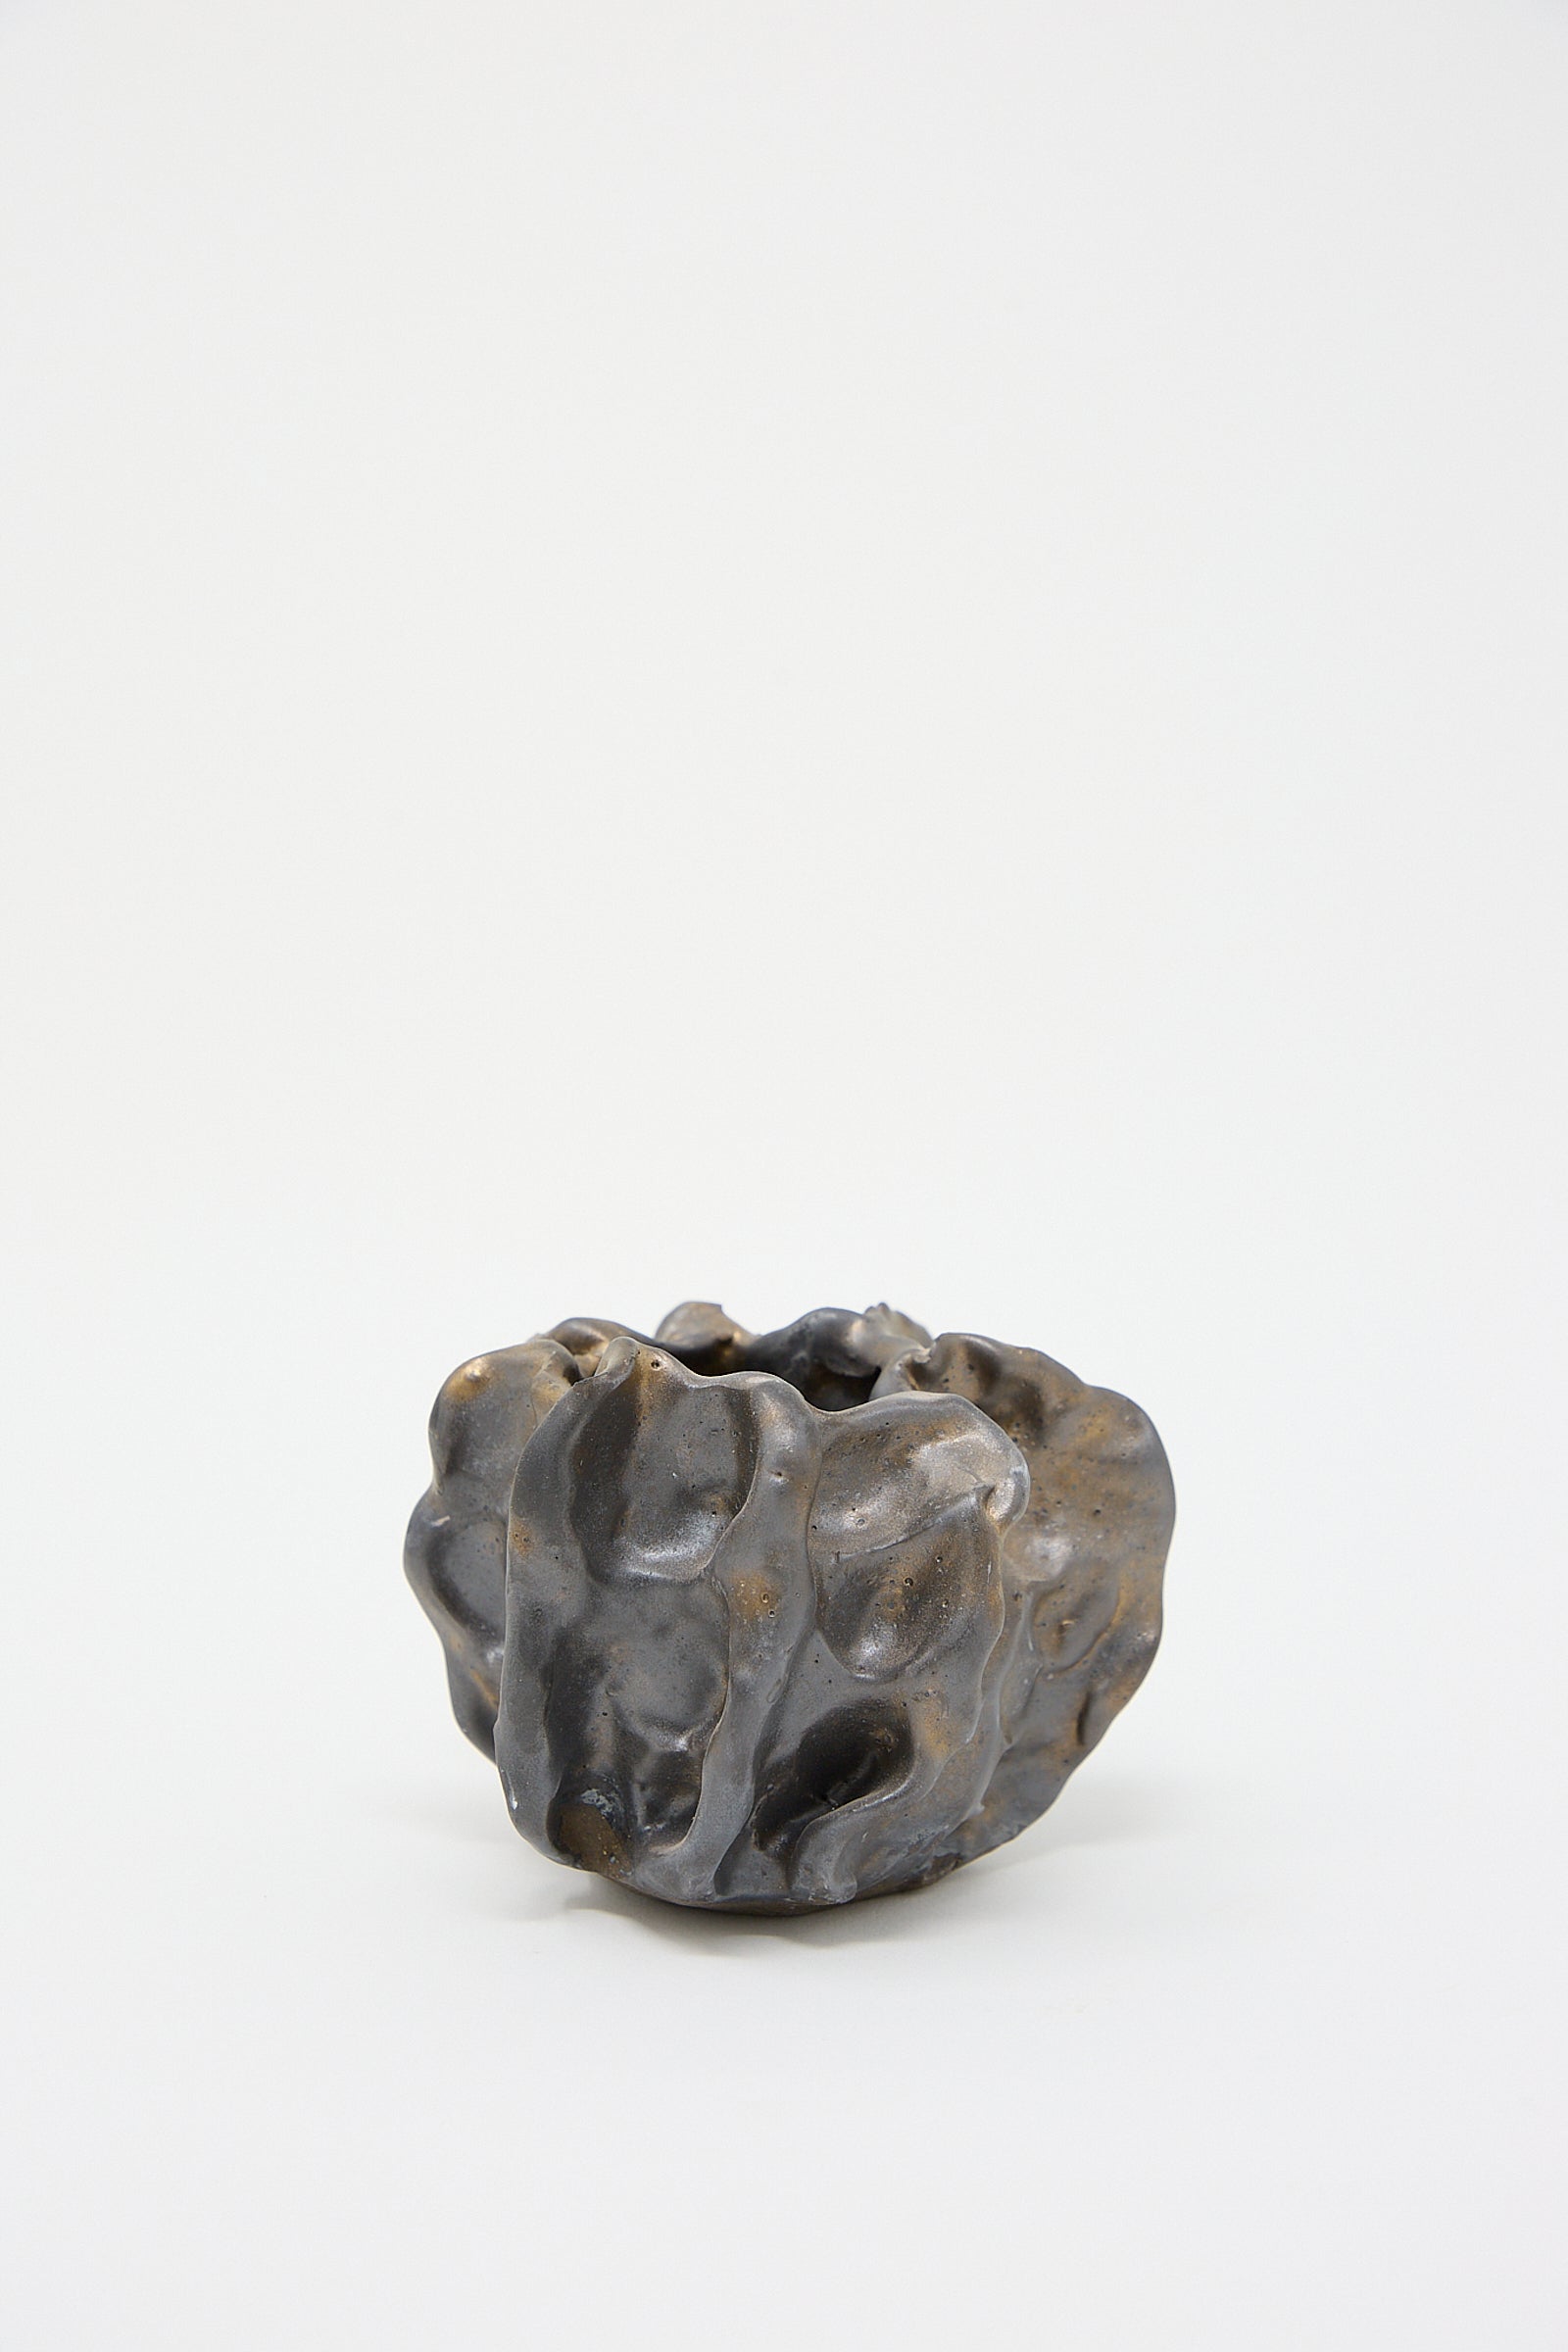 A handmade Urchin Vessel in Glazed Stoneware from MONDAYS in black and brown on a white surface.